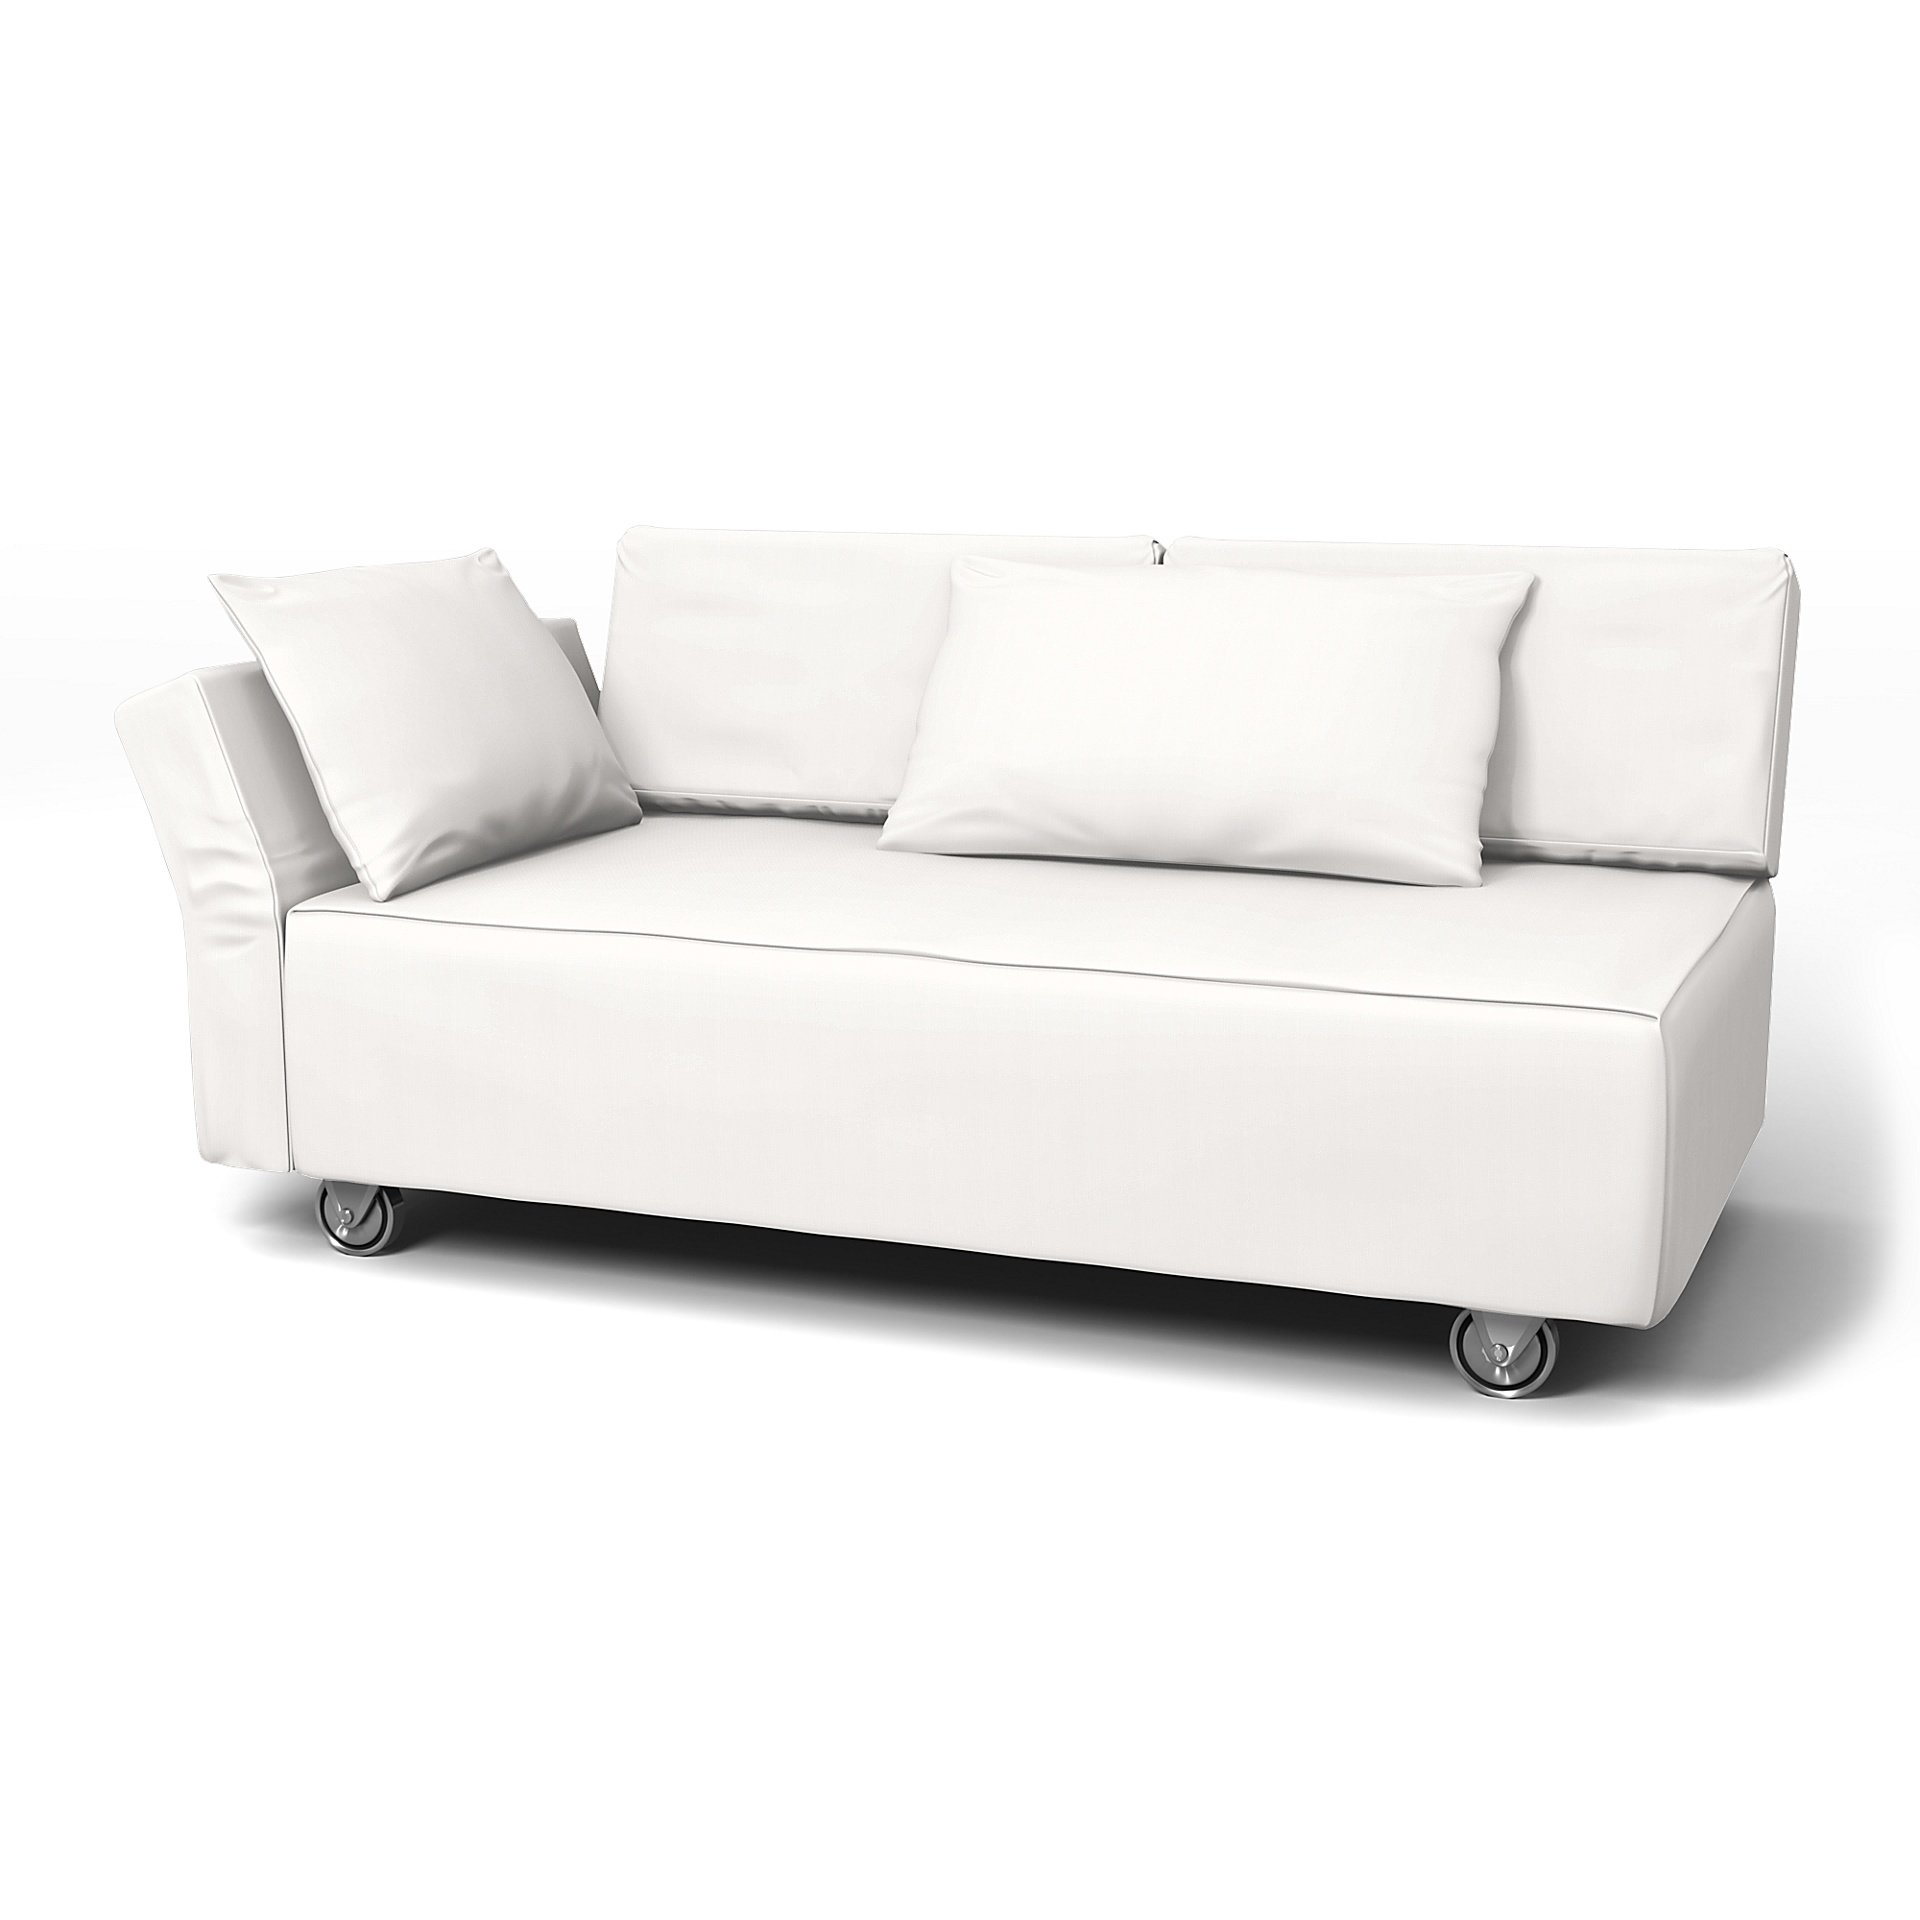 IKEA - Falsterbo 2 Seat Sofa with Left Arm Cover, Soft White, Linen - Bemz